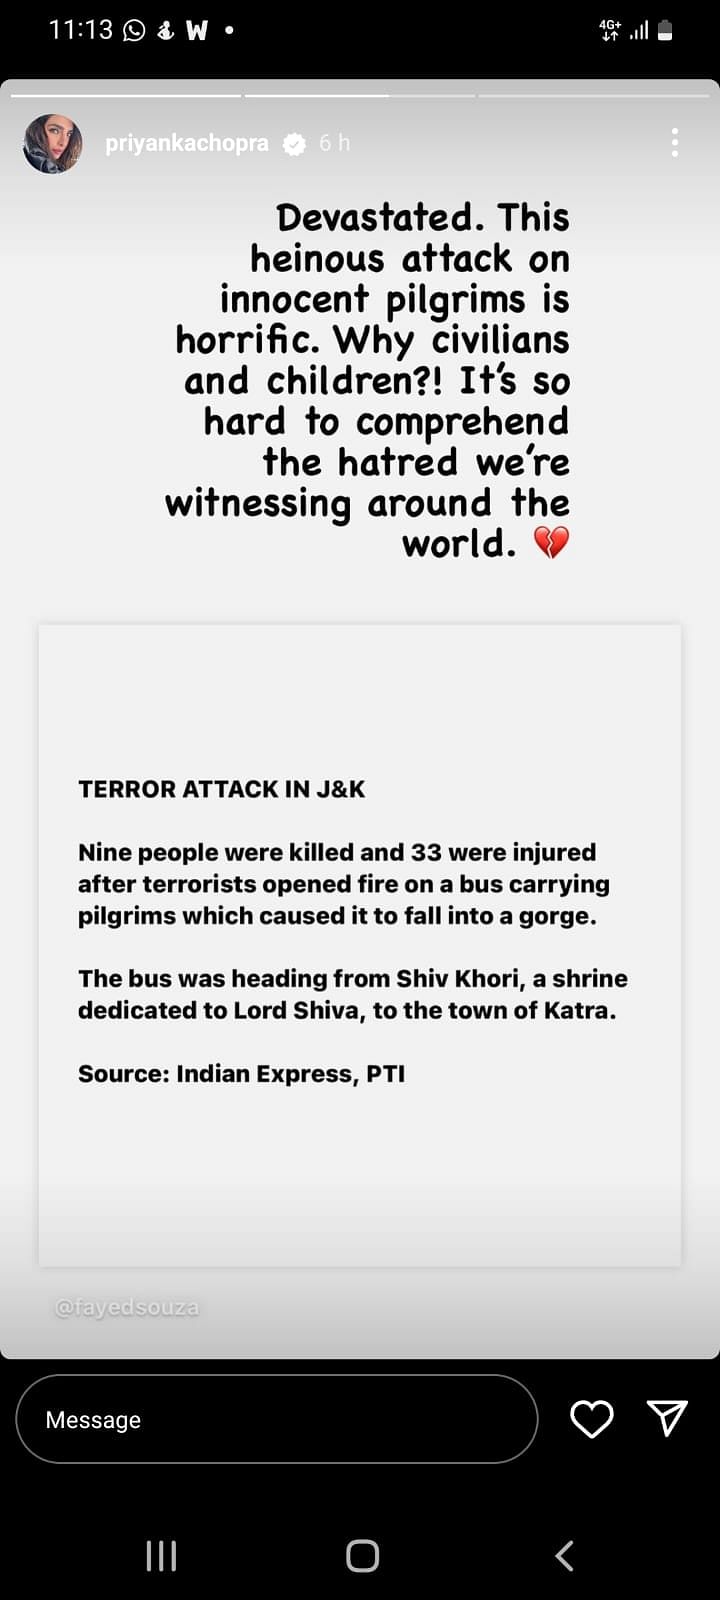 Priyanka Chopra condemned the terrorist attack on a bus carrying pilgrims in Jammu and Kashmir’s Reasi district. 